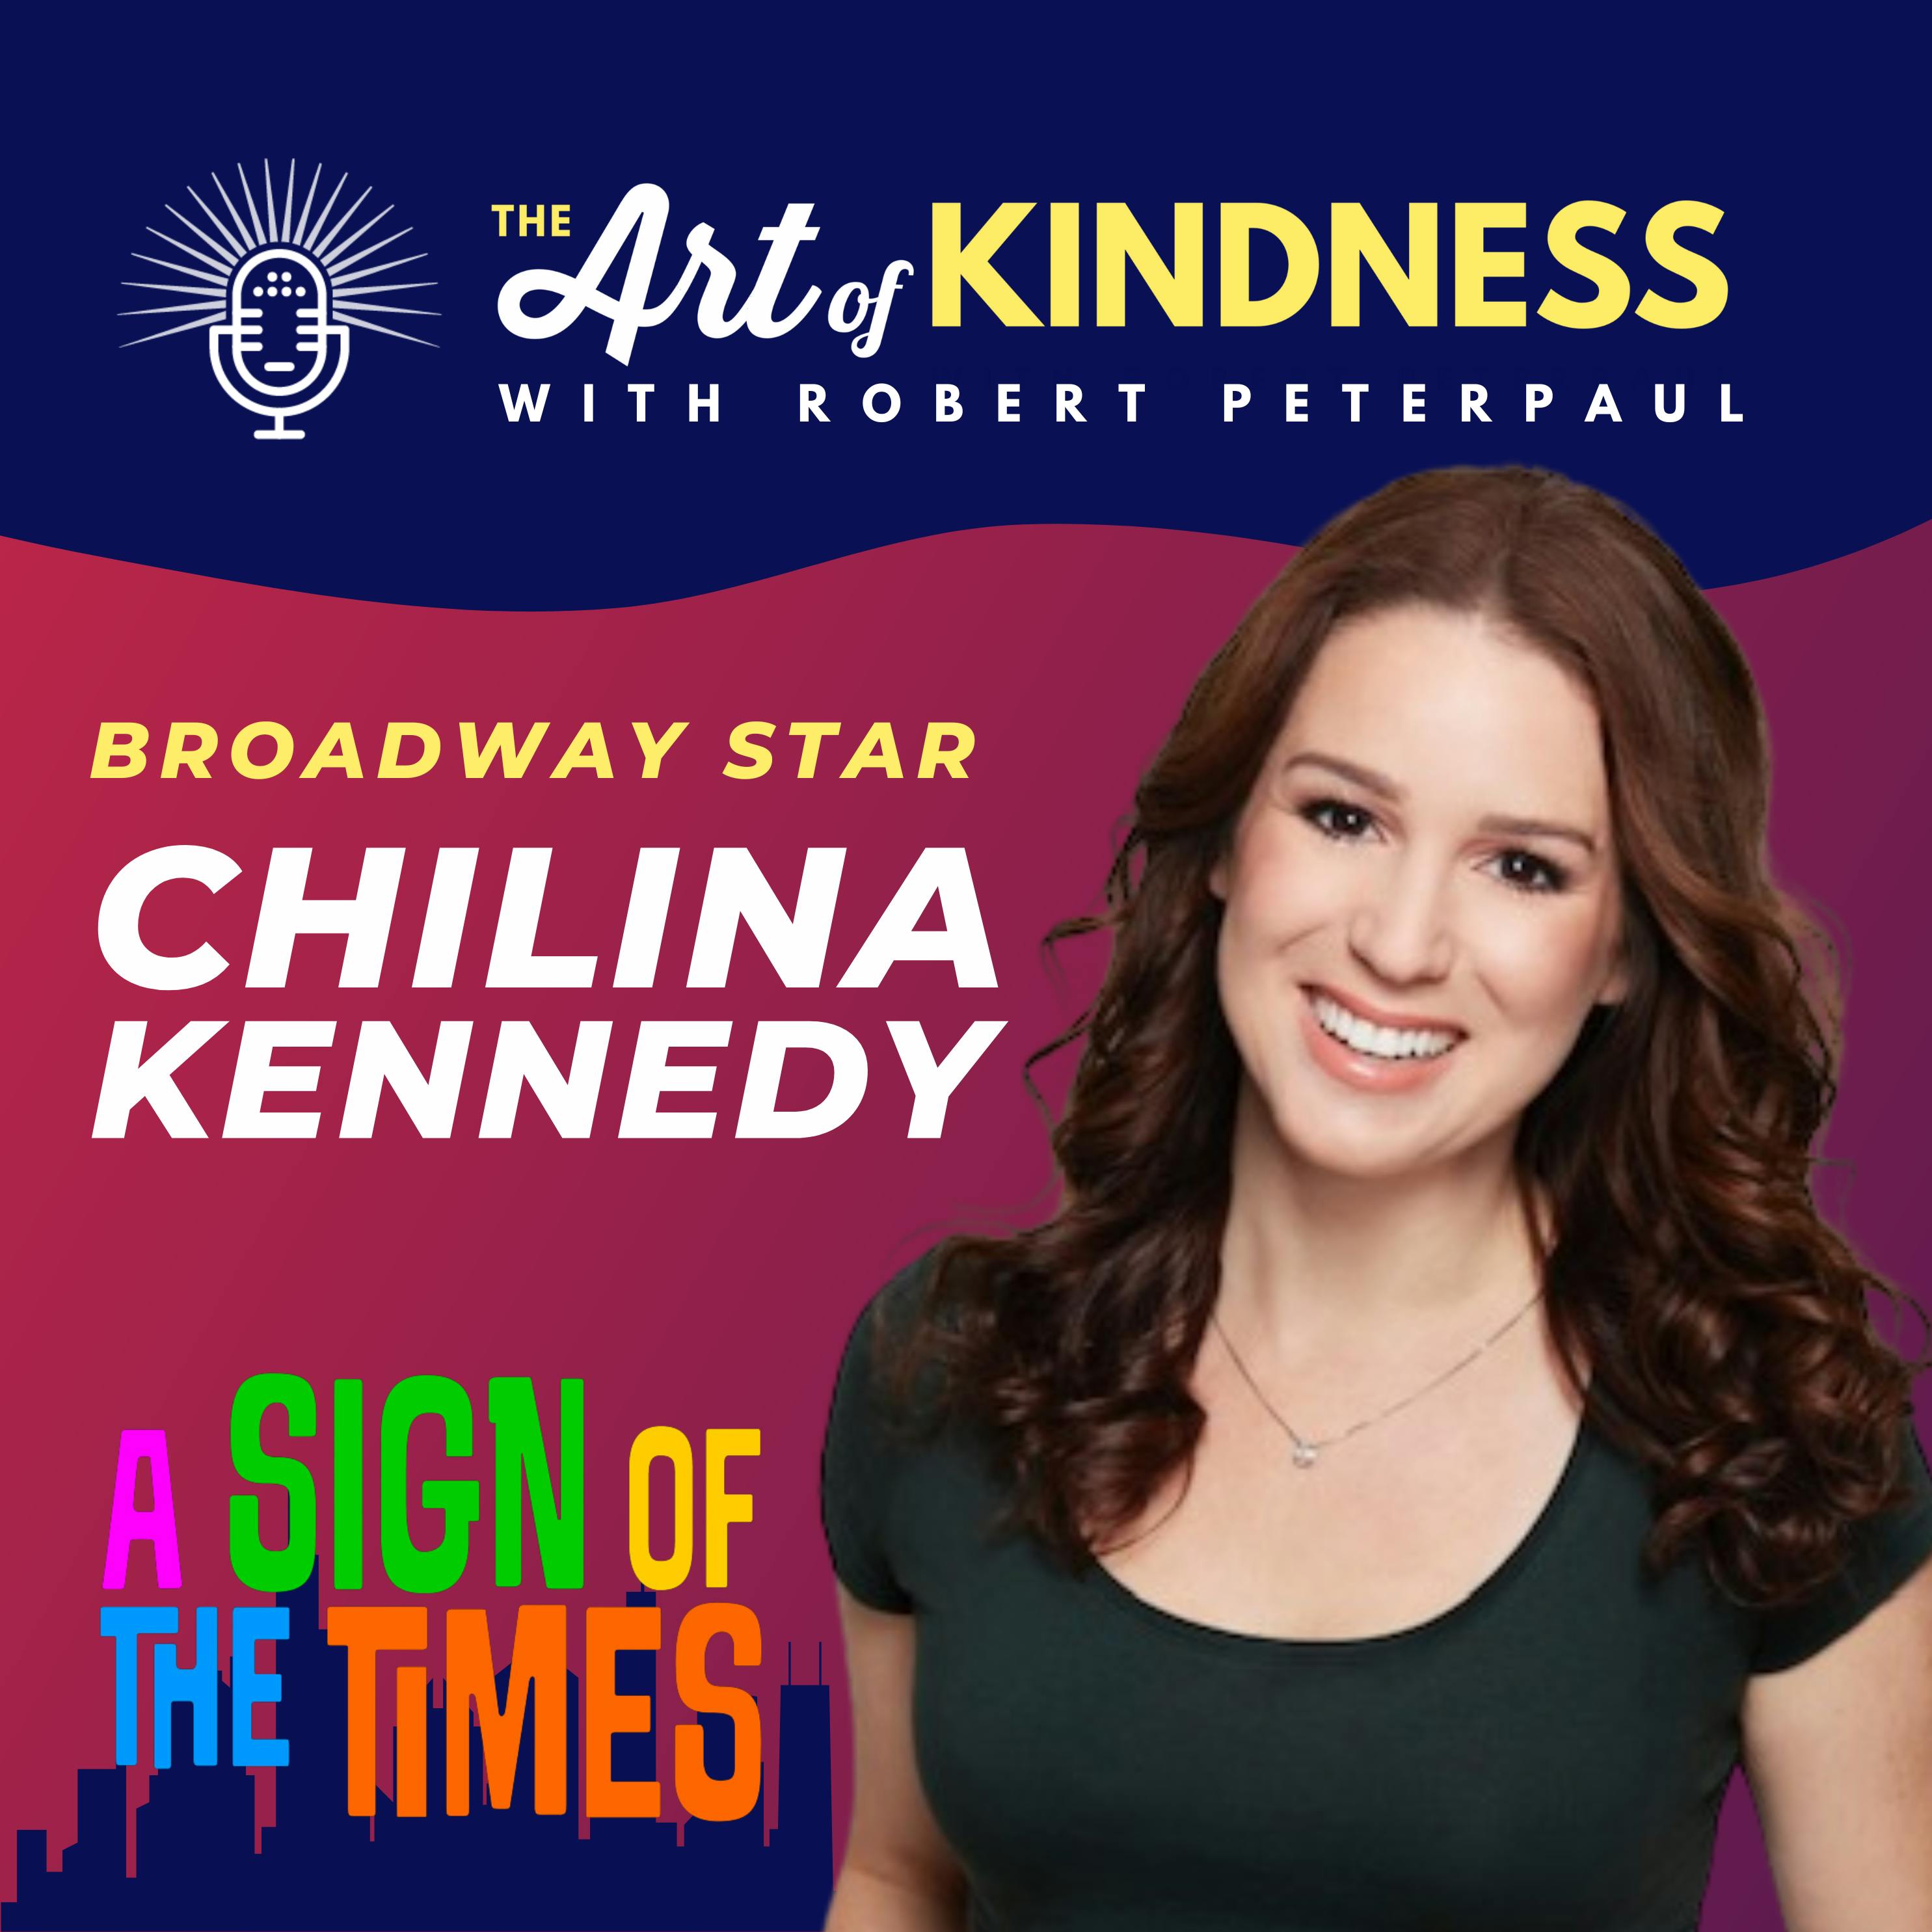 Broadway’s Chilina Kennedy (Beautiful): A Sign of the Times